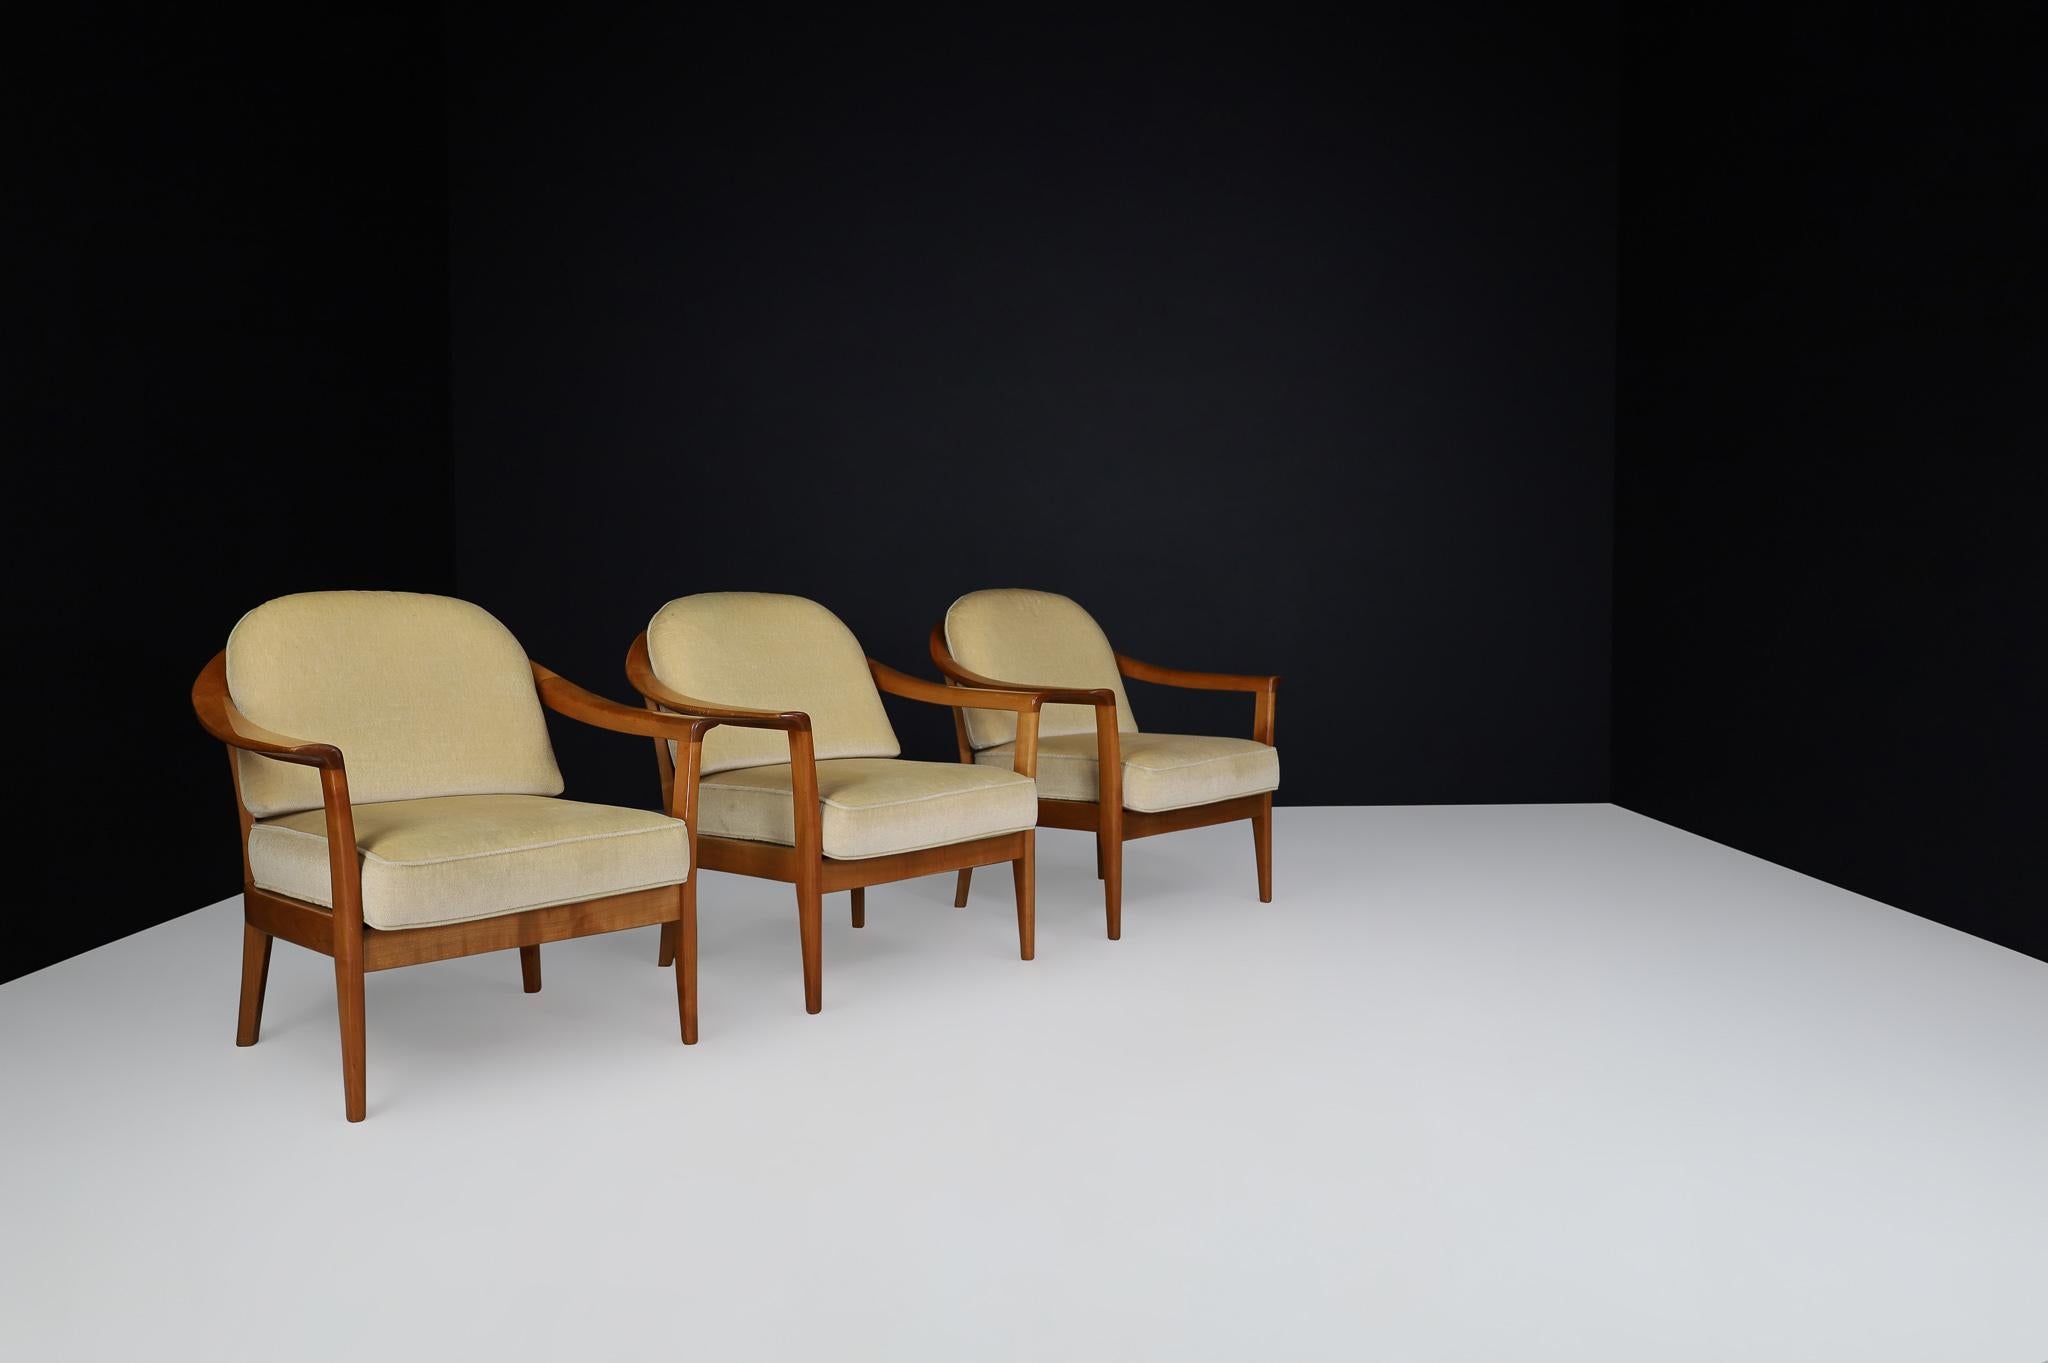 Mid-Century Modern Wilhelm Knol Easy Chairs In Cherry and Original Upholstery, Germany 1960s For Sale